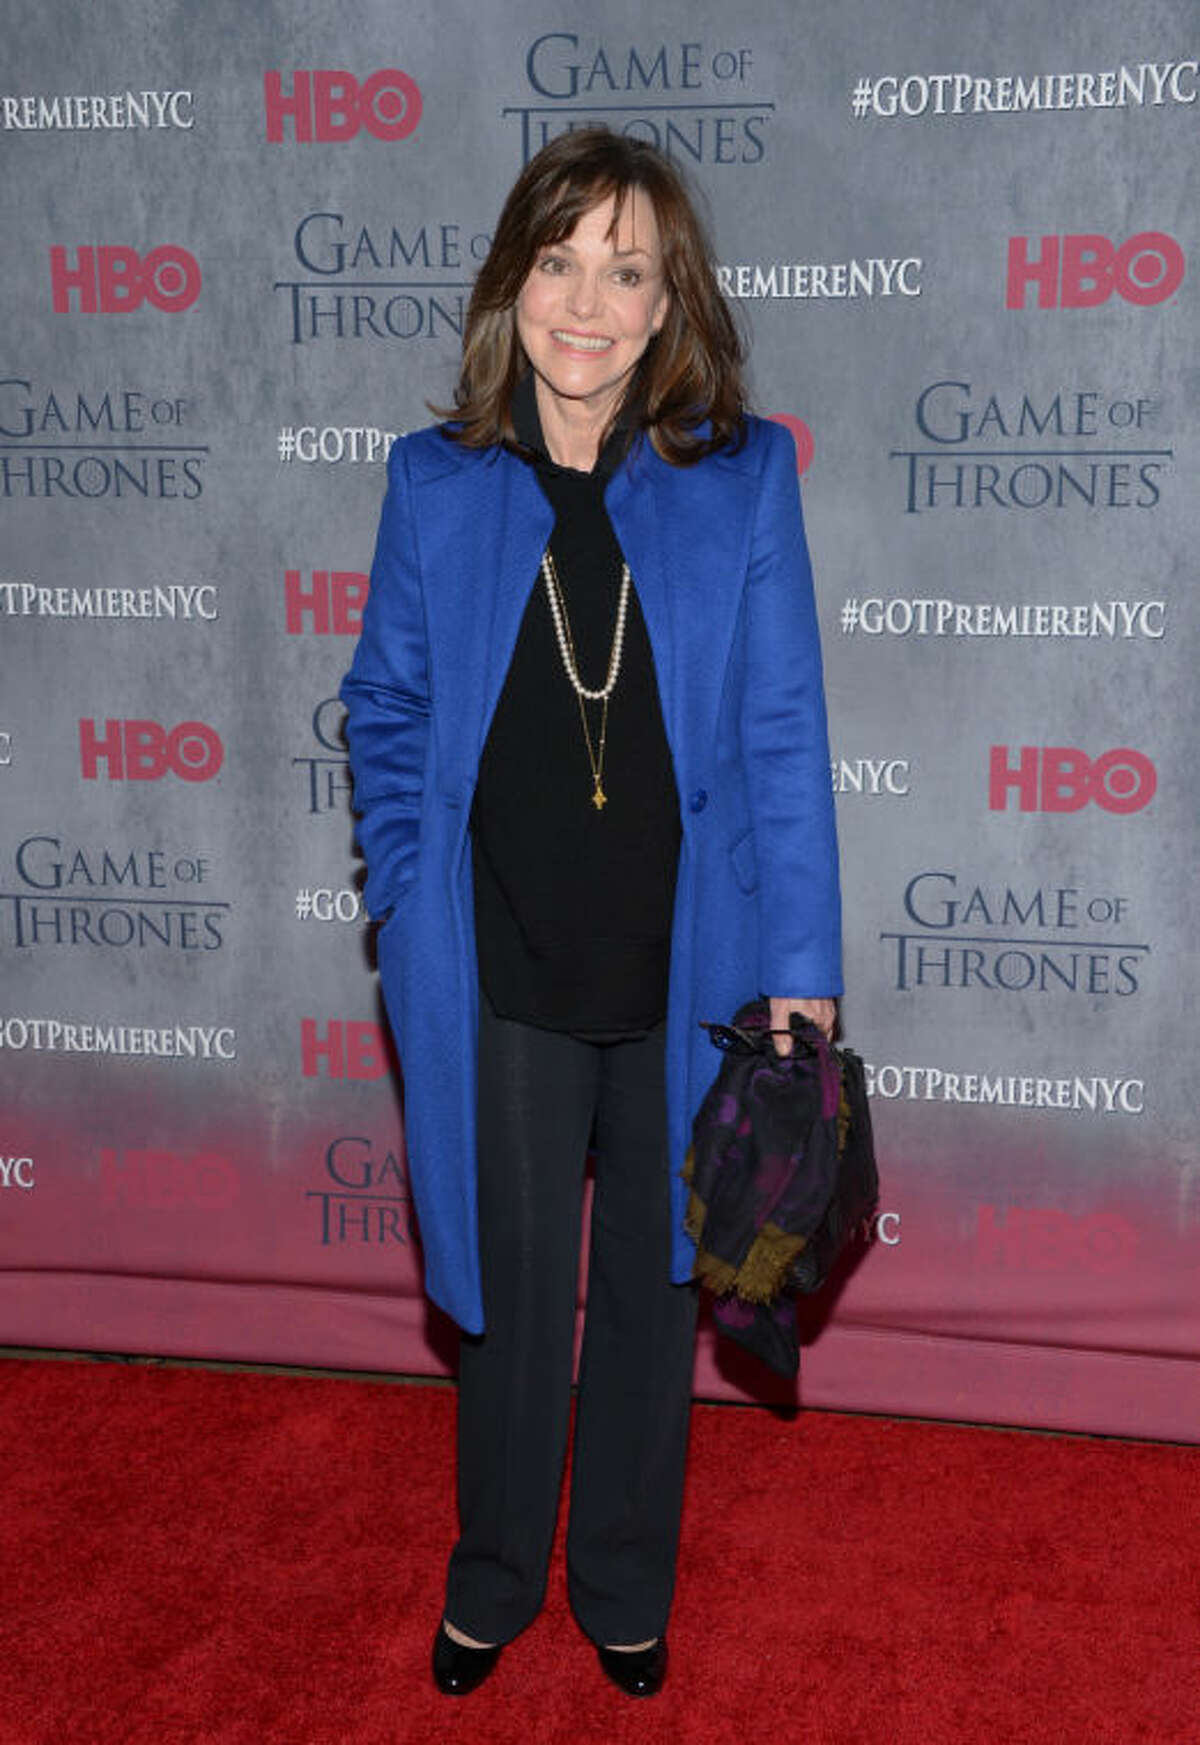 Actress Sally Fields attends HBO's "Game of Thrones" fourth season premiere at Avery Fisher Hall on Tuesday, March 18, 2014 in New York. (Photo by Evan Agostini/Invision/AP)